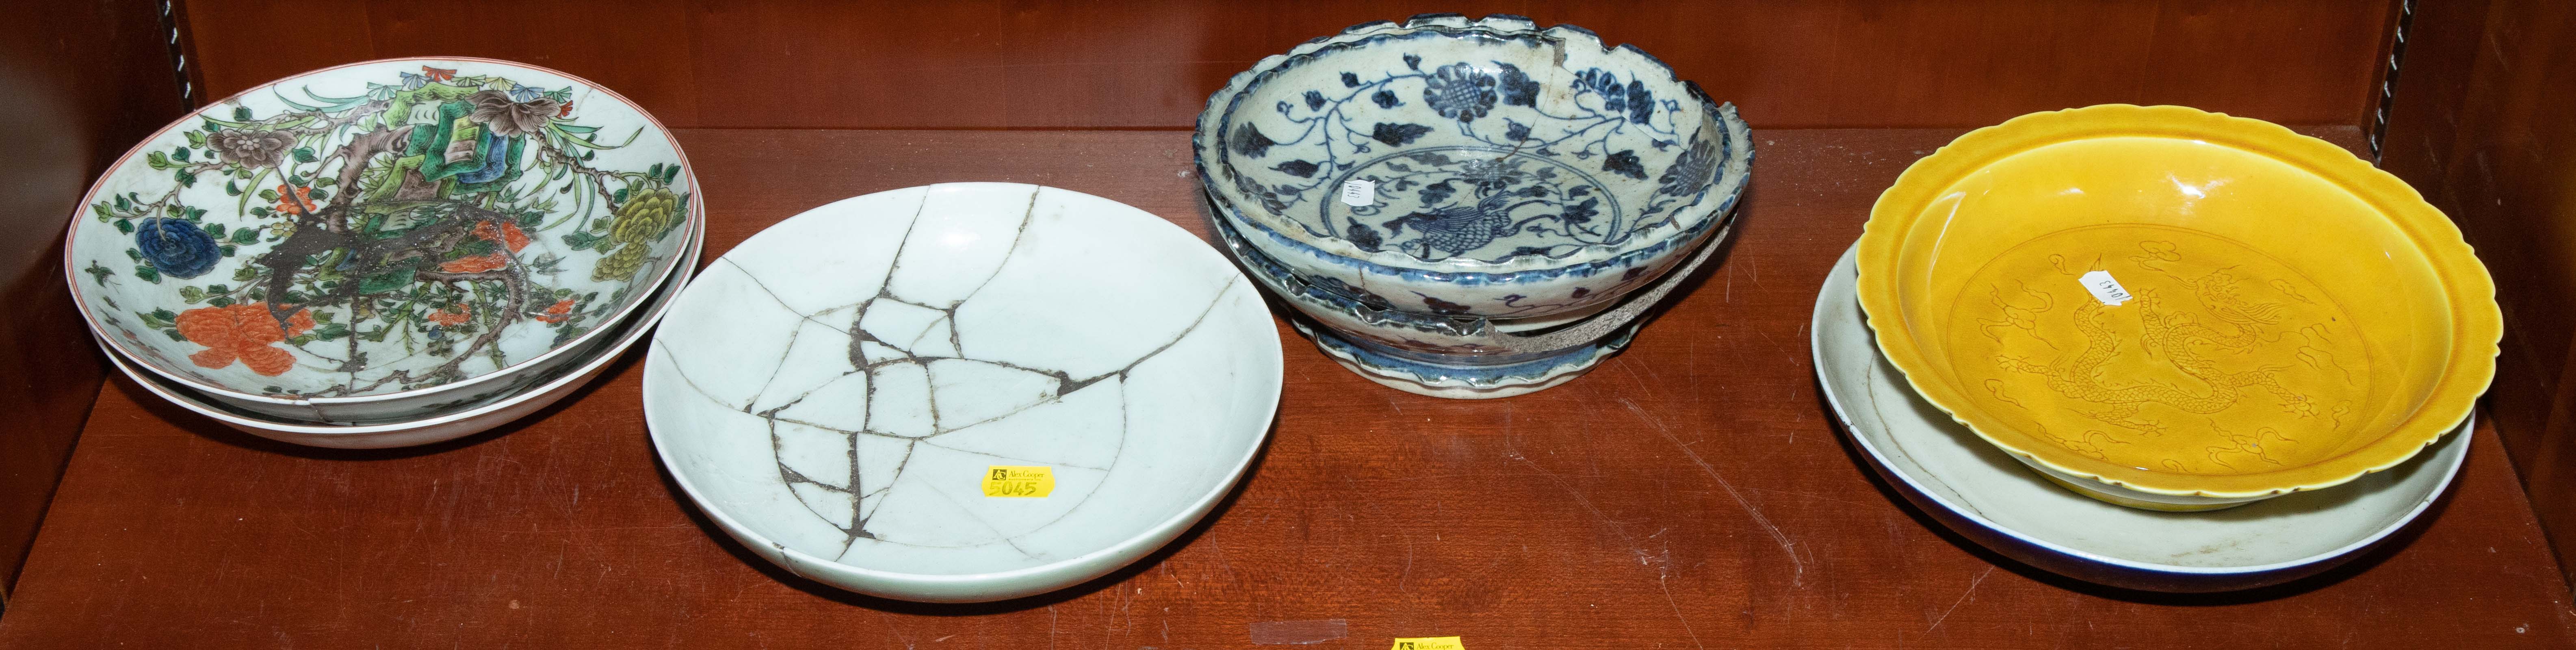 SELECTION OF CHINESE ANTIQUE STYLE